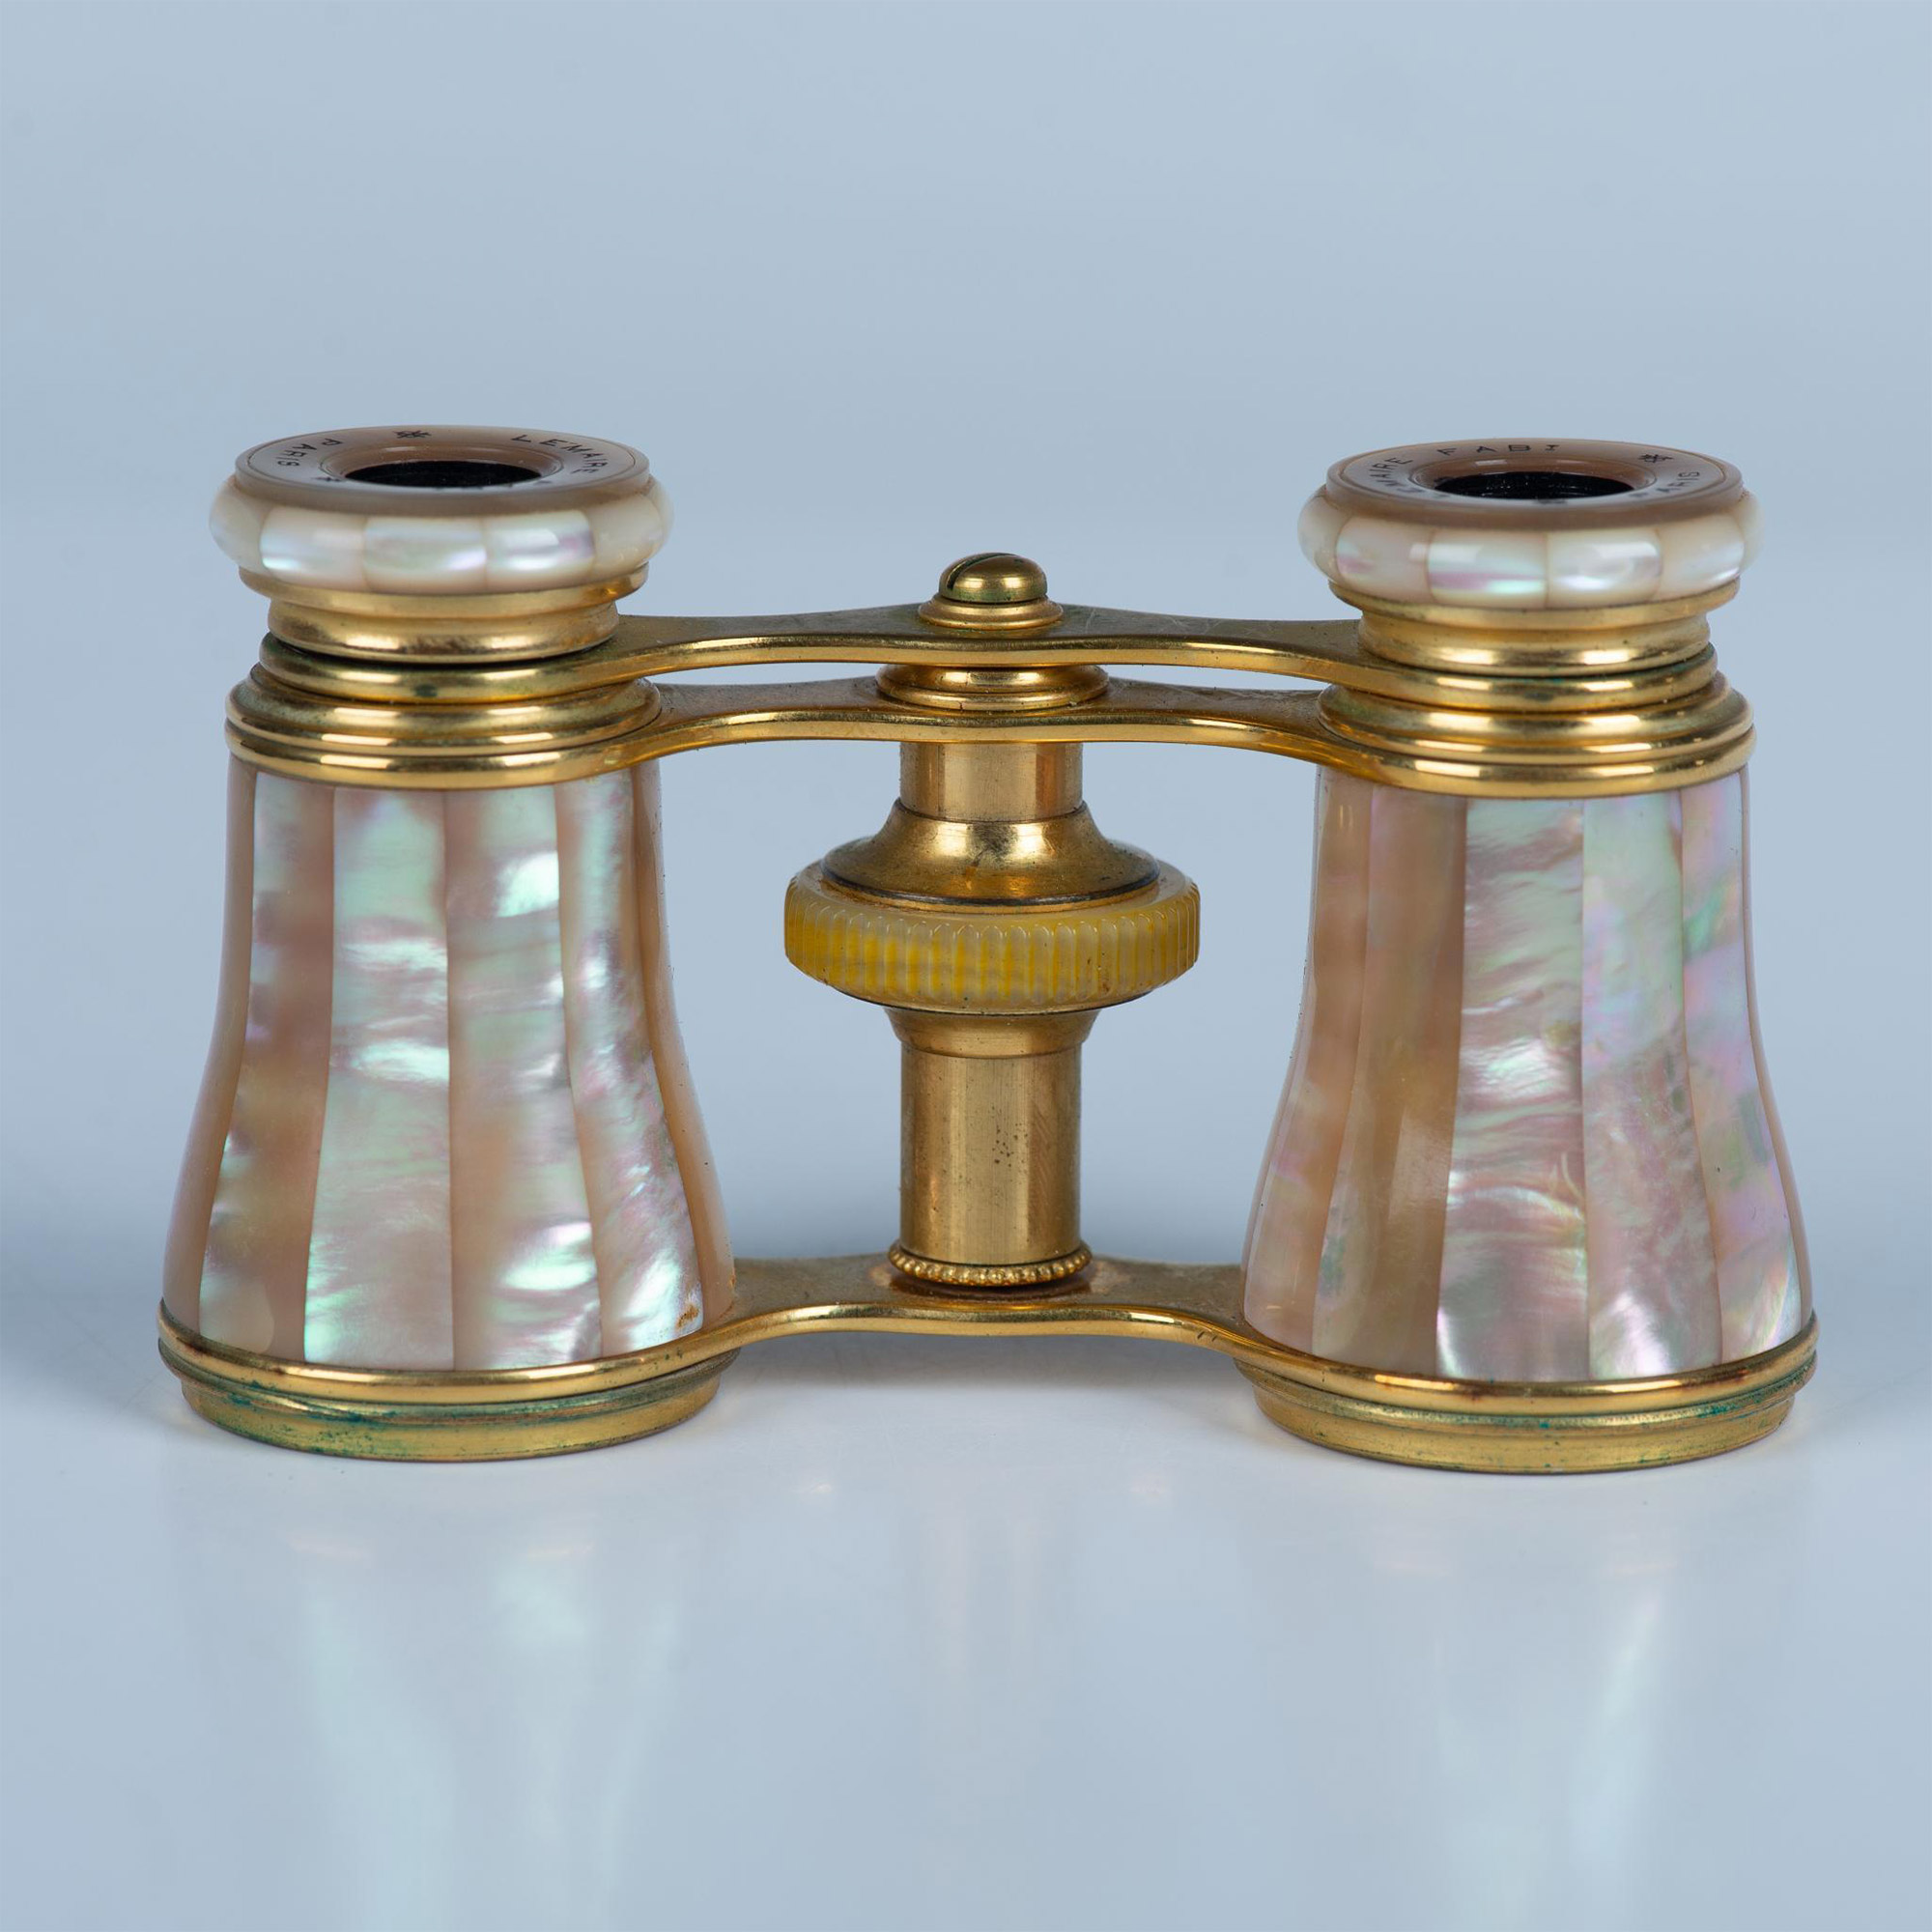 Lemaire Paris Mother of Pearl Fabt Opera Glasses & Case - Image 6 of 6